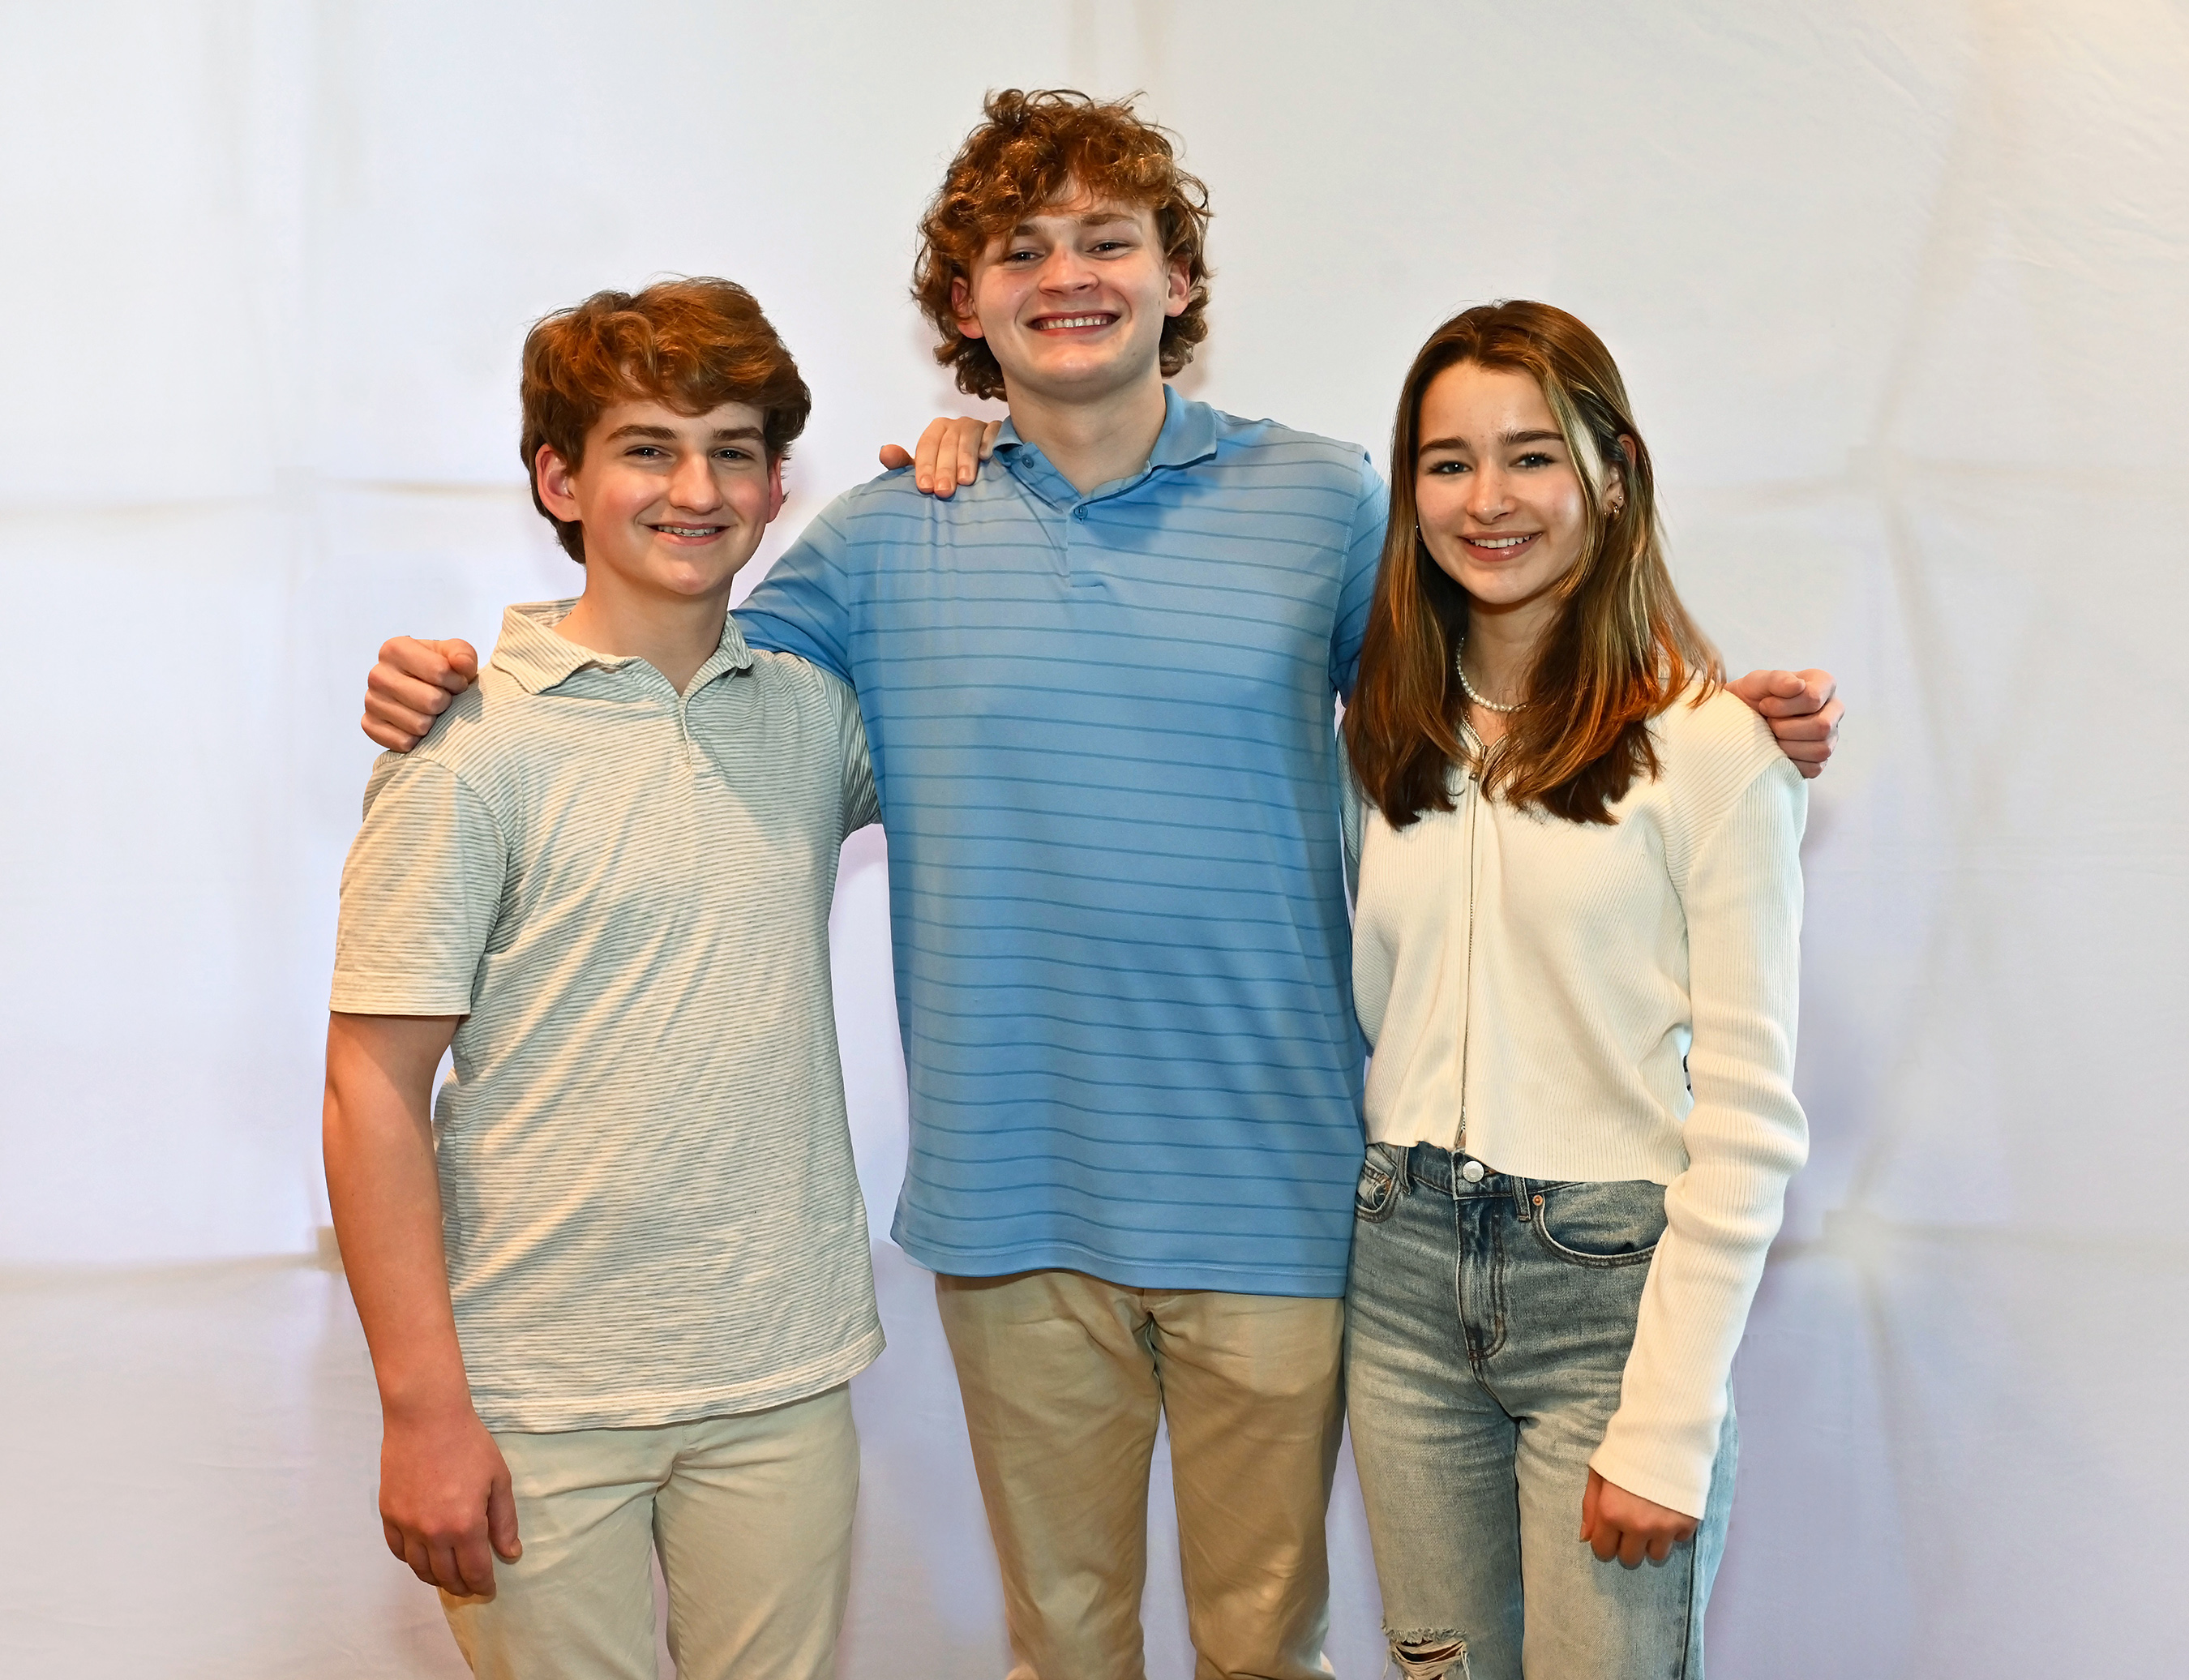 The Leukemia & Lymphoma Society’s 2022 Students of the Year national winners, team “The Answer for Cancer” (from left to right): Jordan Loughran, Barrett Hight, Alice Voigt